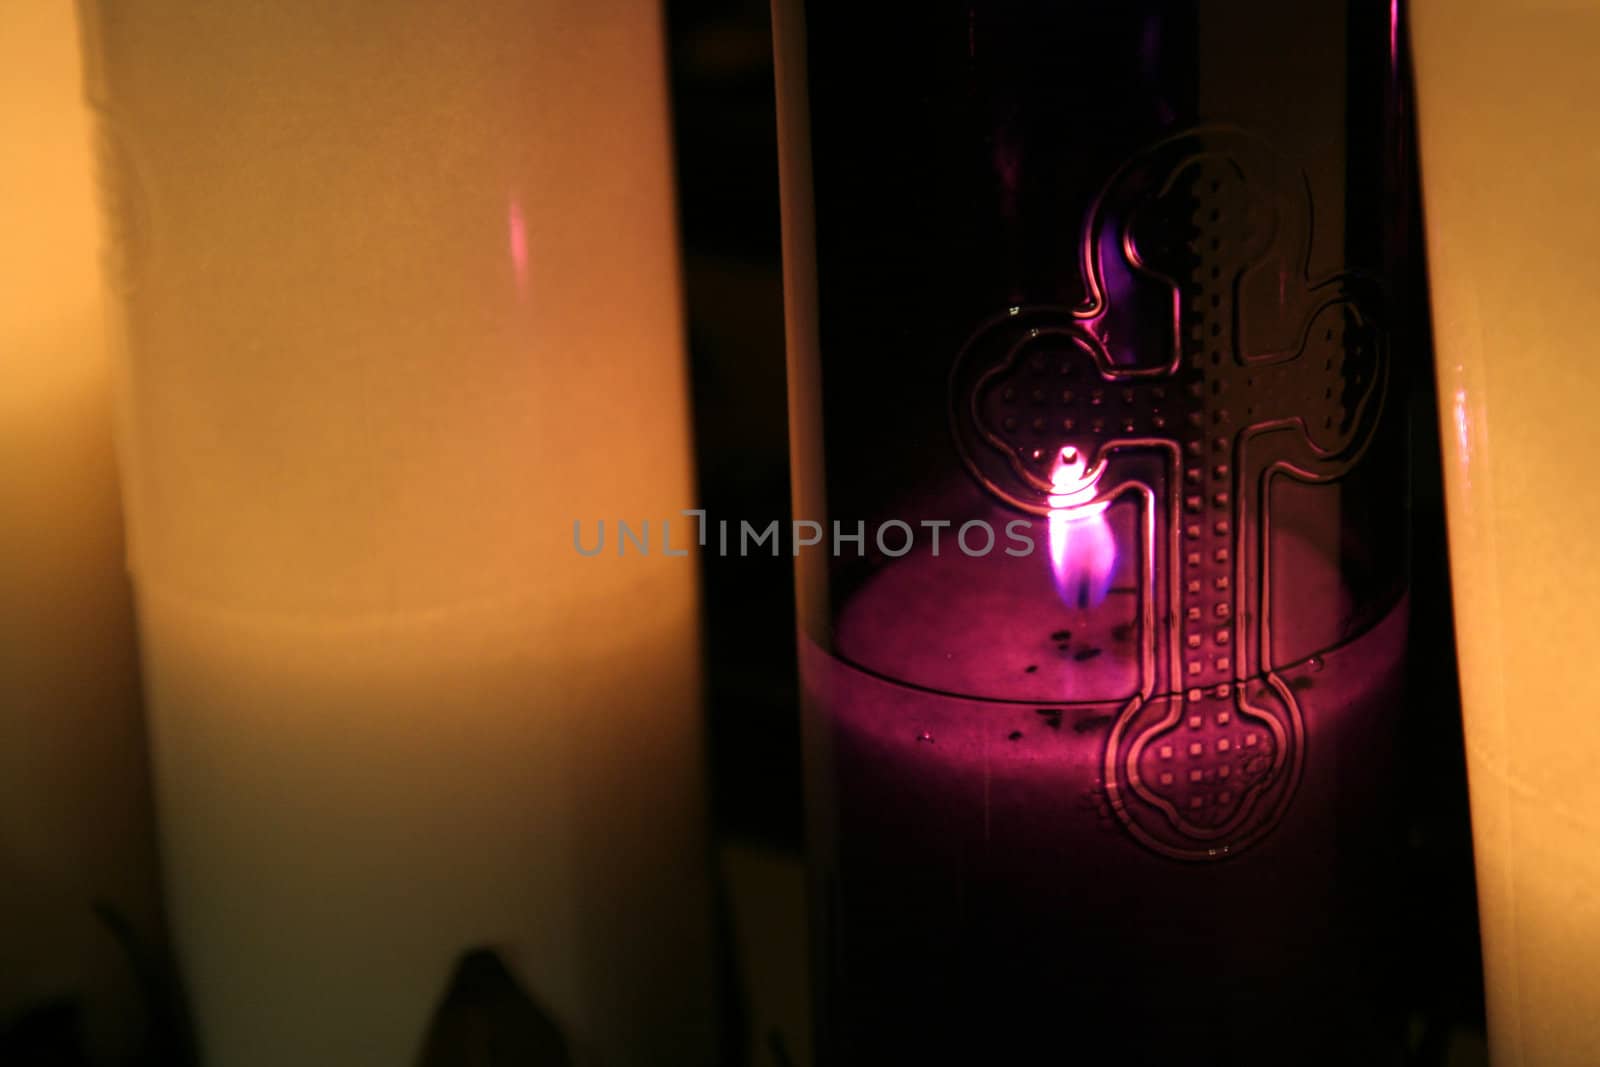 A close-up of a purple candle with a cross engraving on it.